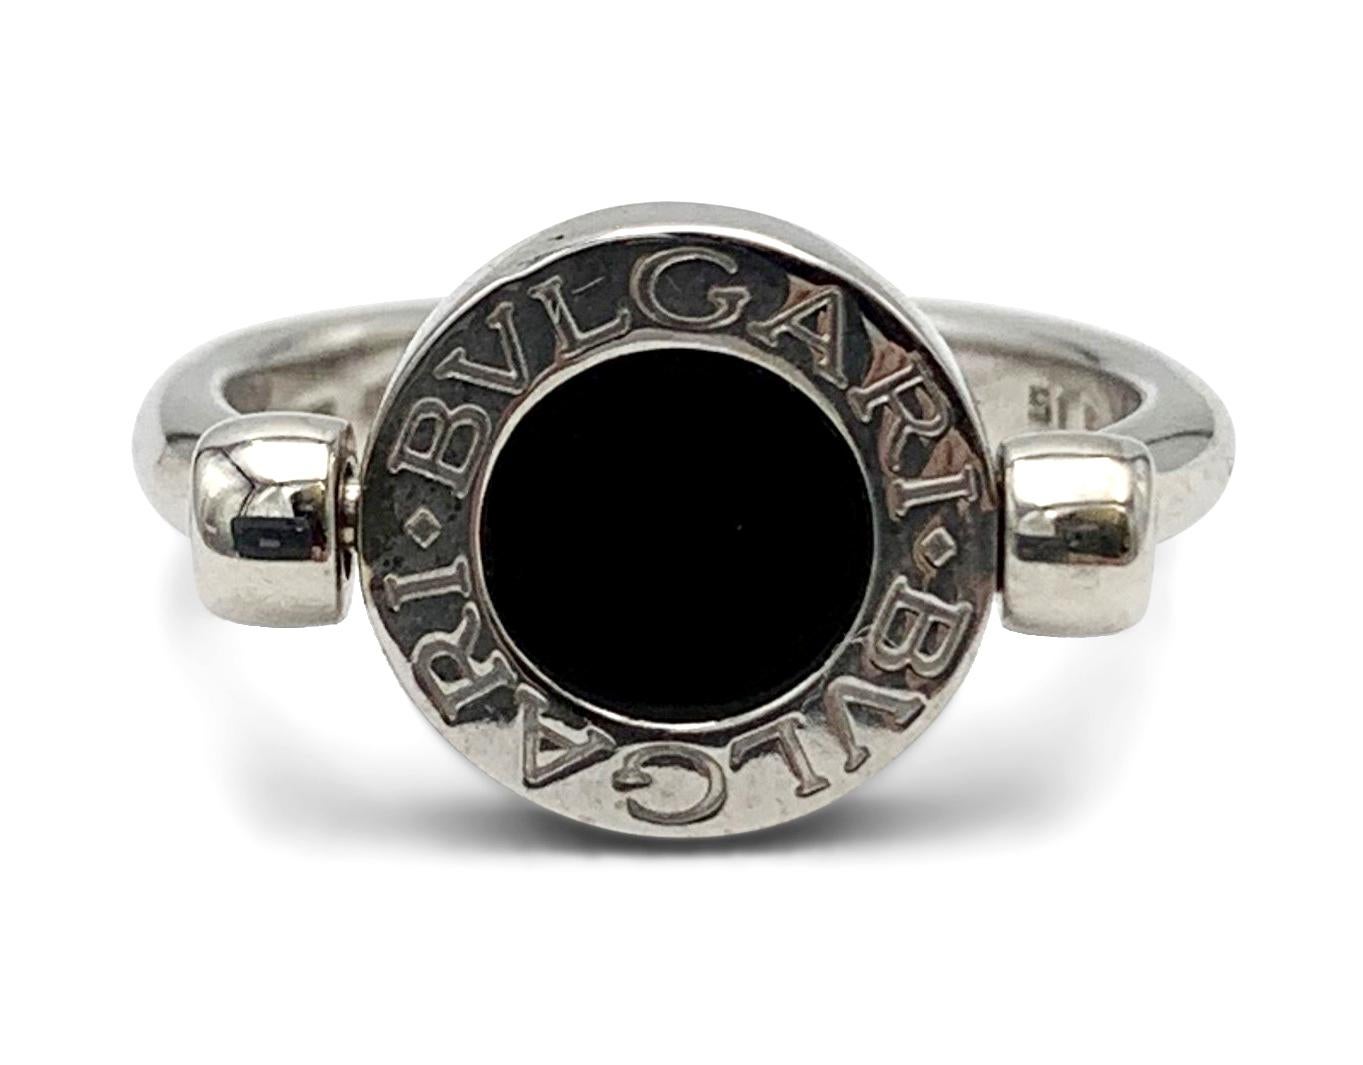 Authentic Bvlgari-Bvlgari flip ring crafted in 18 karat white gold. One side of the ring features pave set high-quality round brilliant cut diamonds weighing an estimated 0.14 carats total weight. The other side is set with an onyx stone. Both sides